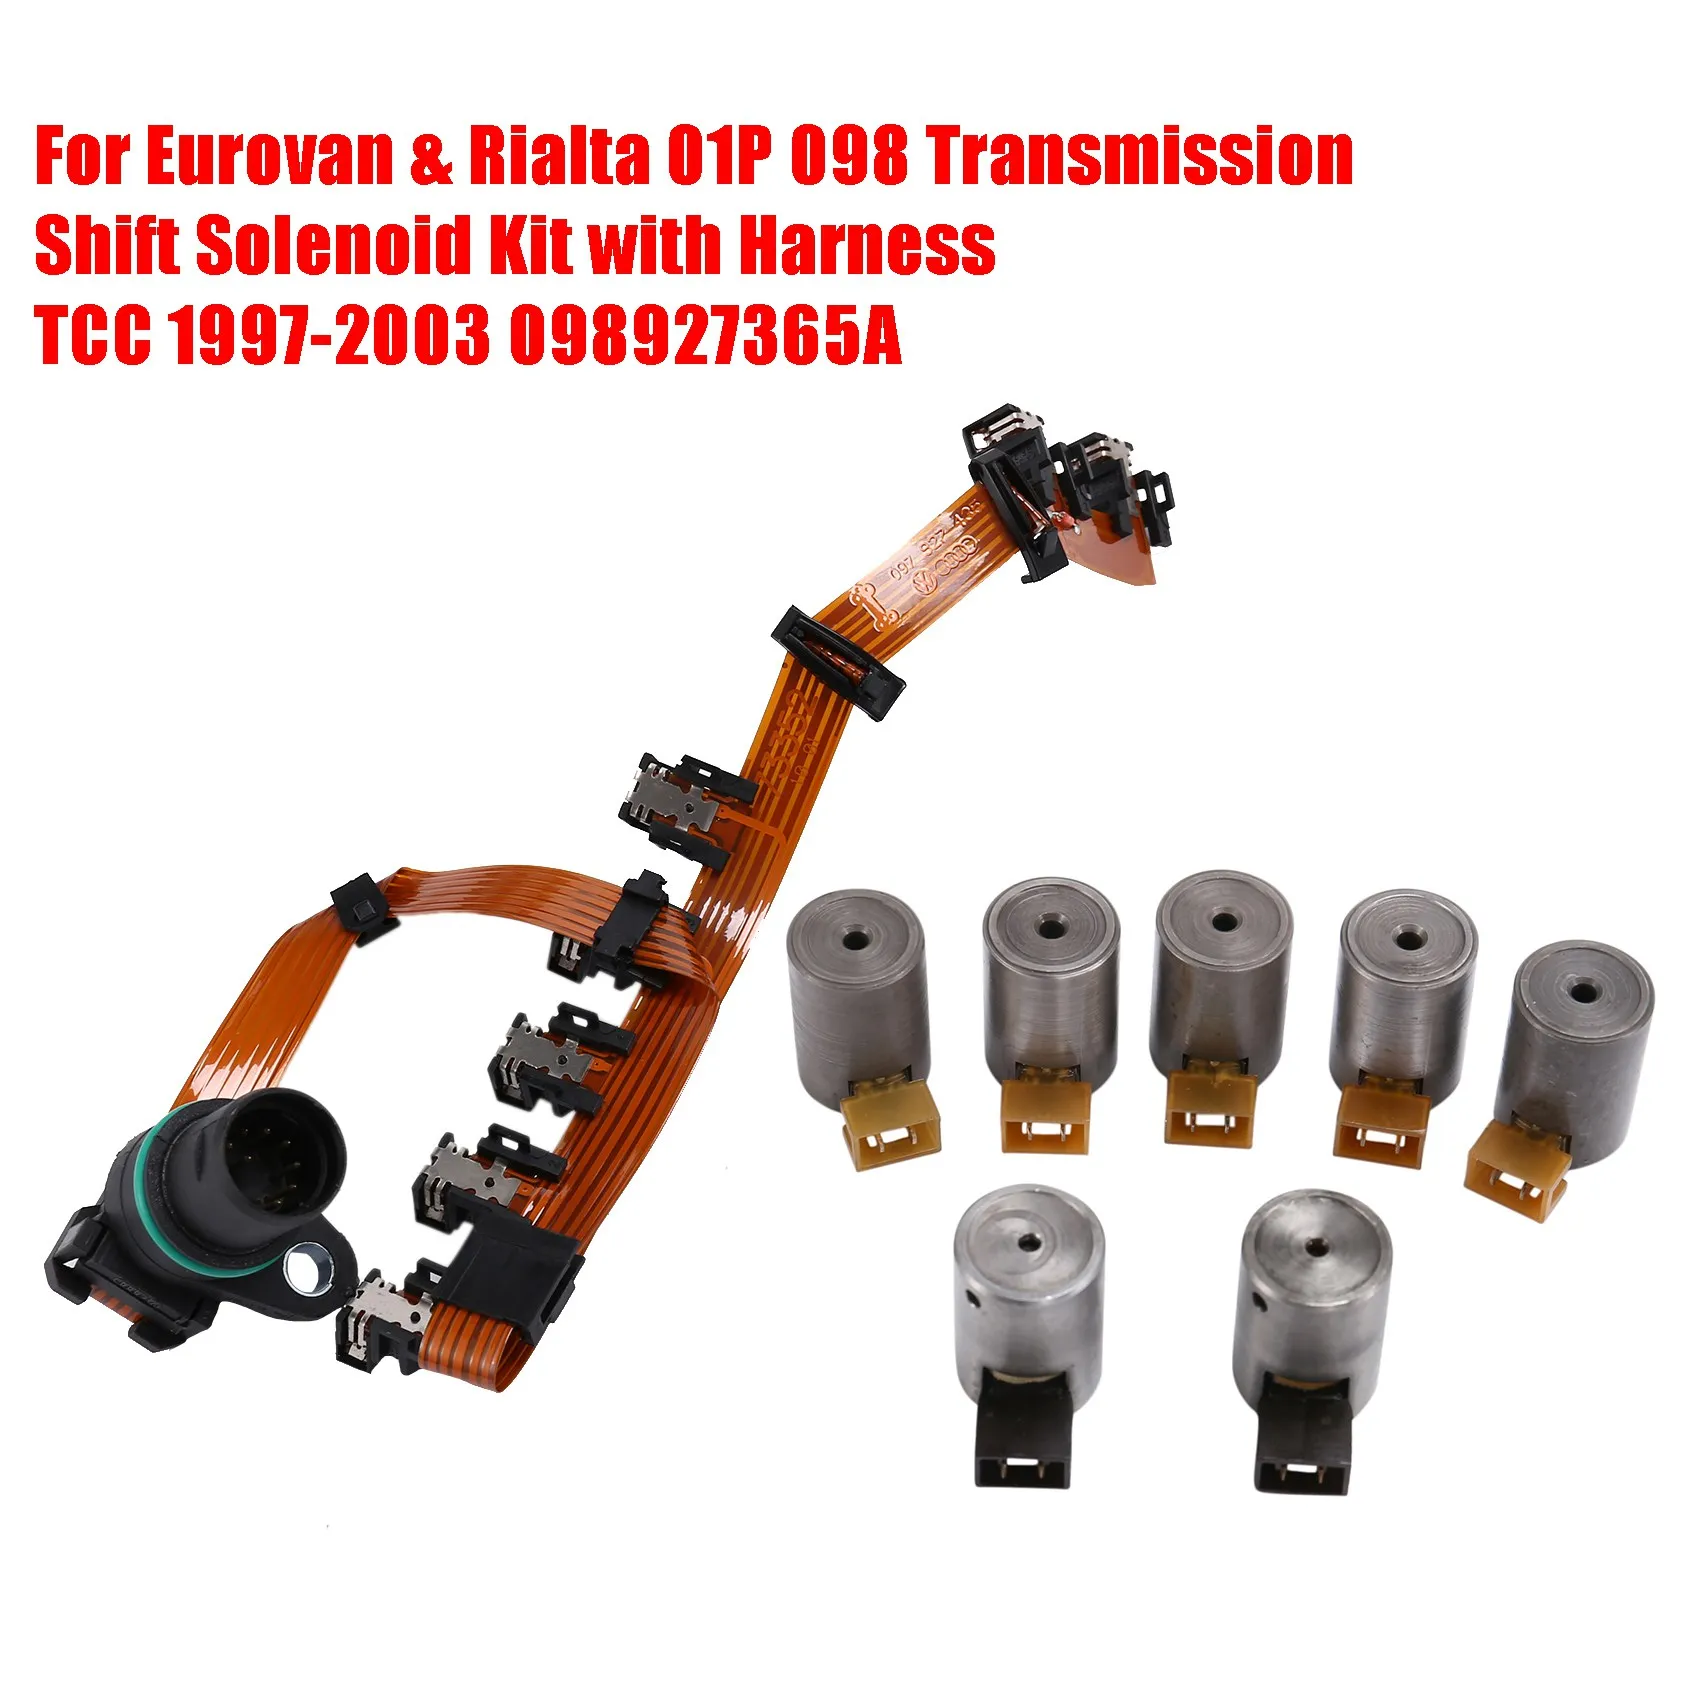 

For Eurovan & Rialta 01P 098 Transmission Shift Solenoid Kit with Harness TCC 1997-2003 098927365A